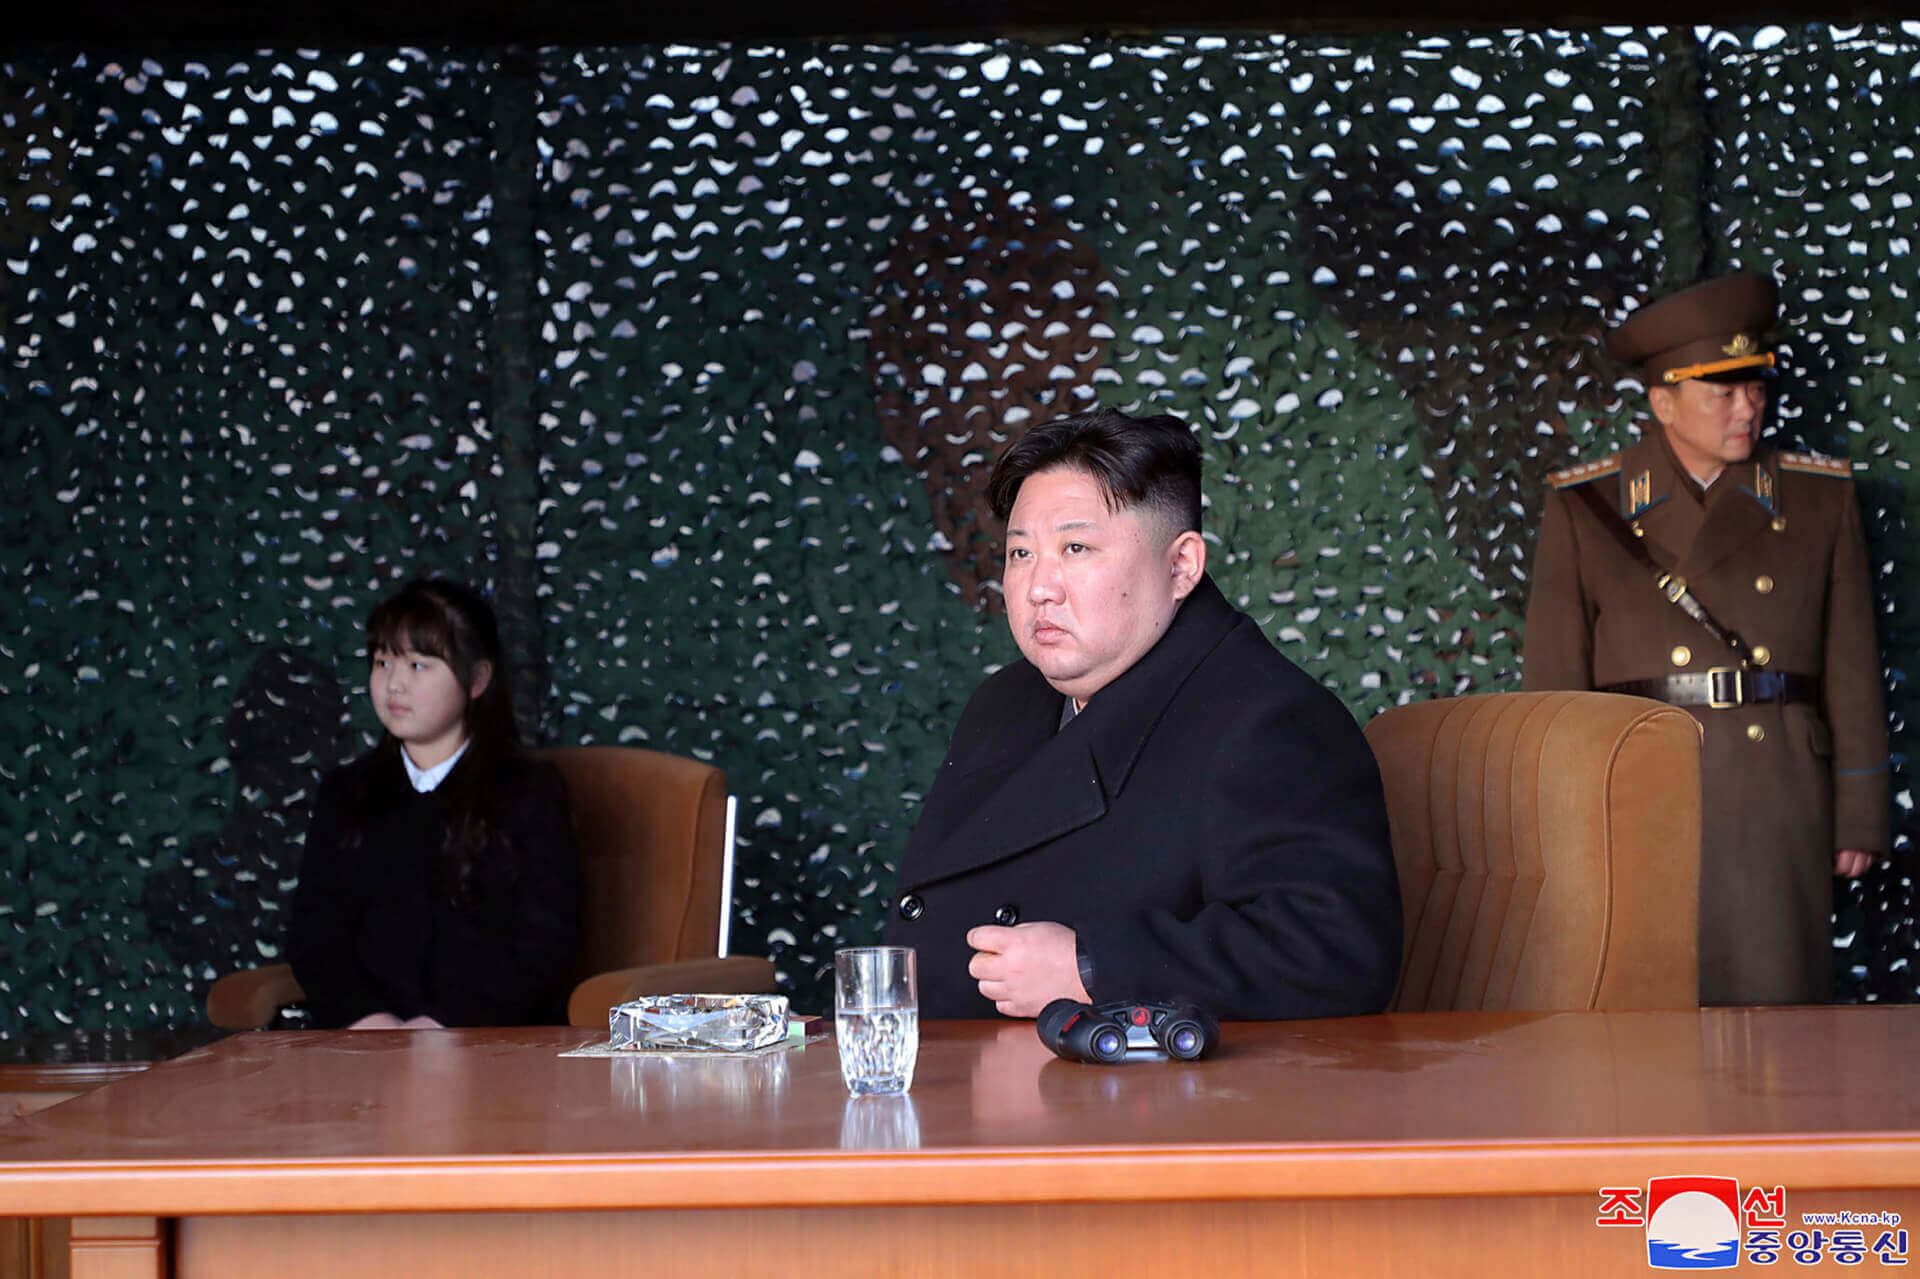 North Korea Slams US for Planning UN Meeting to Discuss “Non-Existent” Human Rights Issue